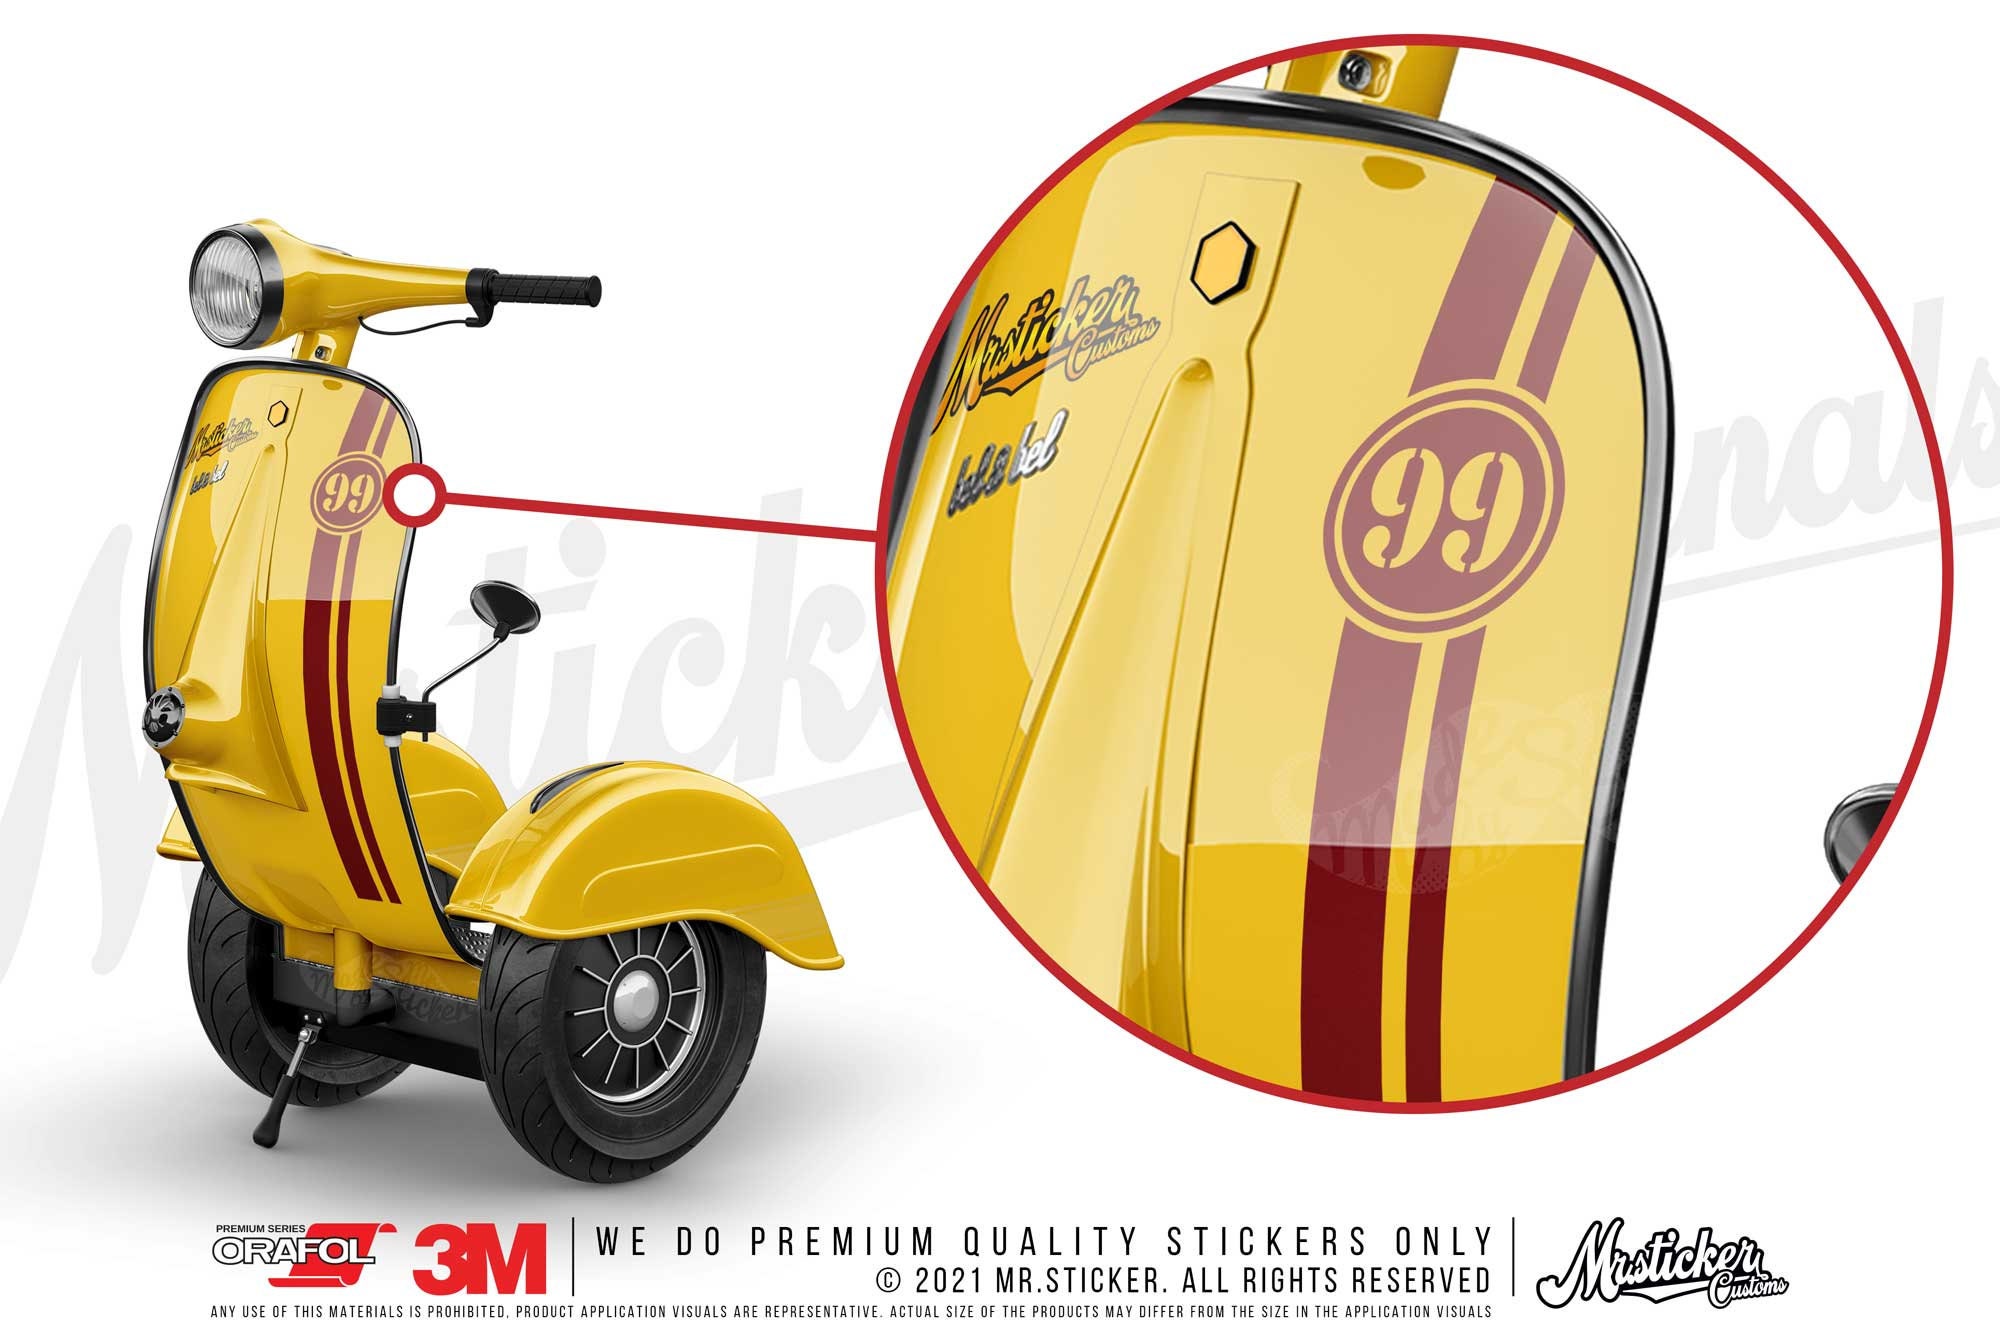 WWSTS34 Customizable Number Decal/ Sticker for Vespa and Scooters